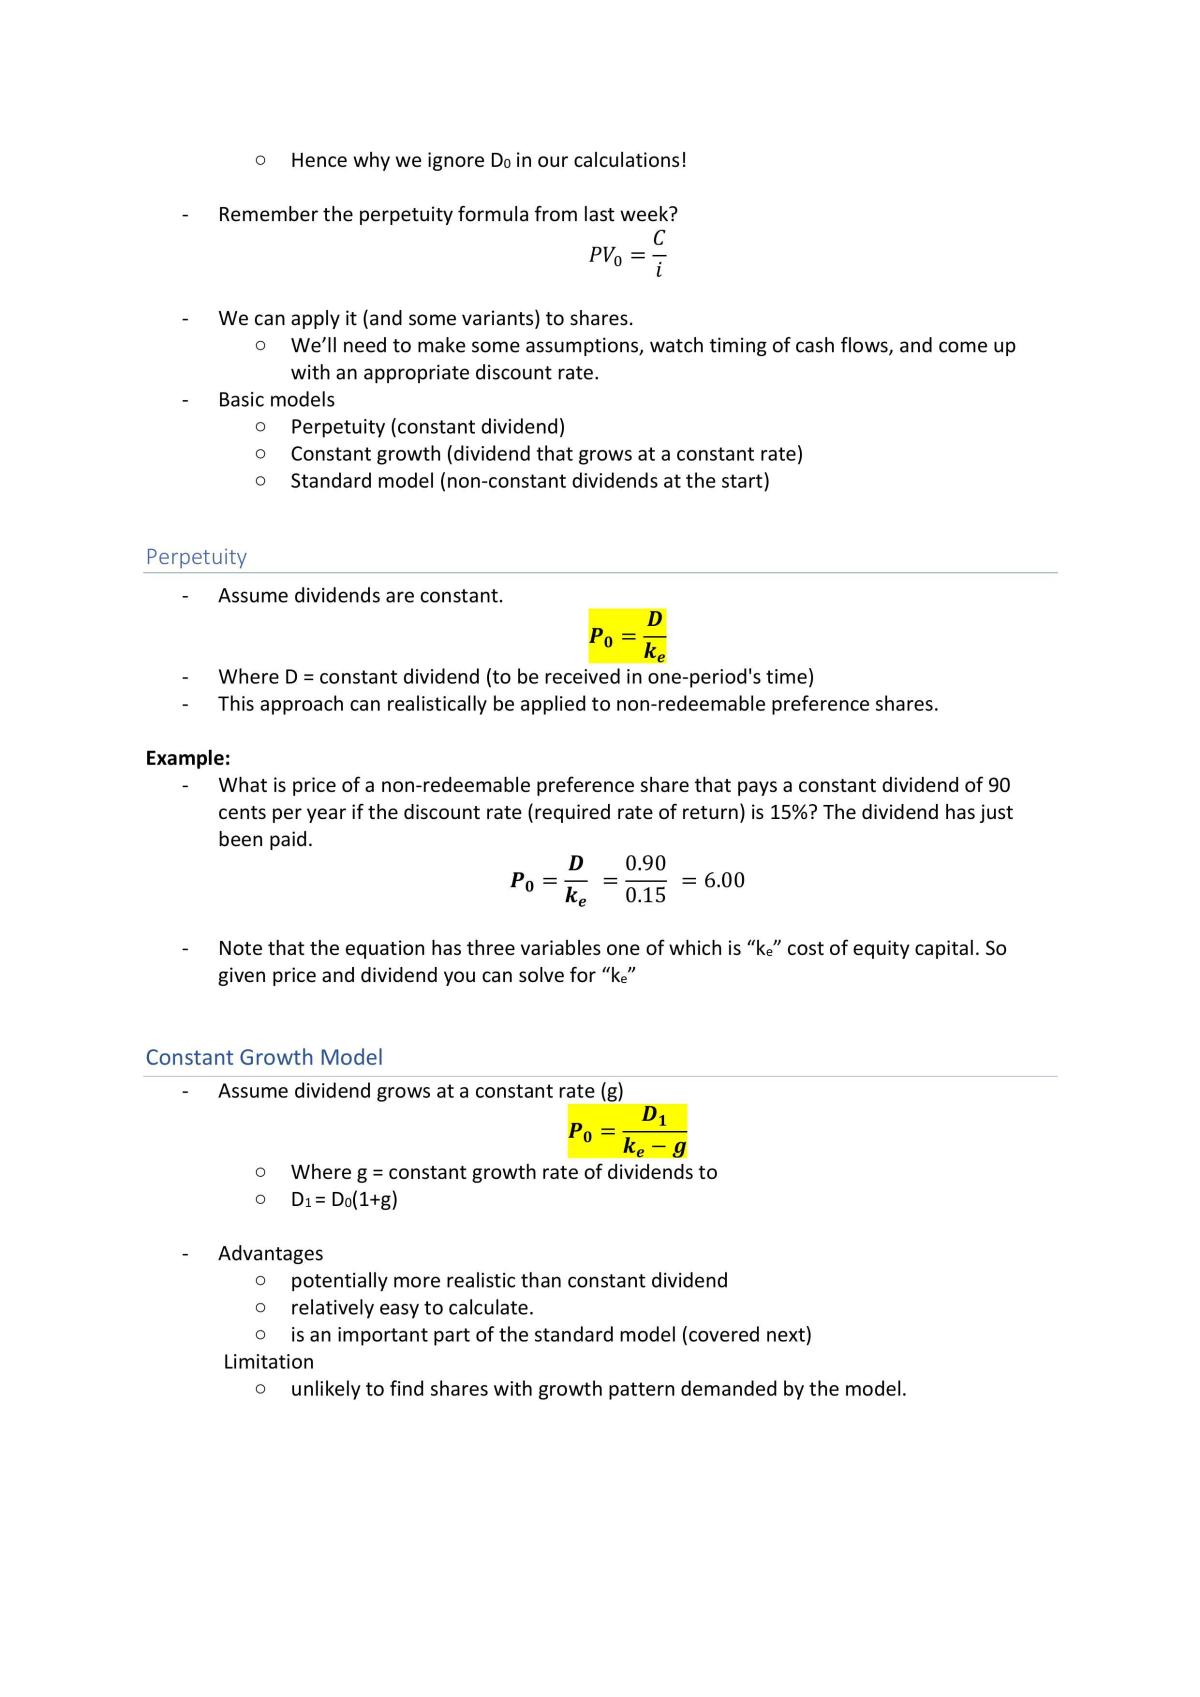 EFB210 Revision Notes for Mid-Sem - Page 19